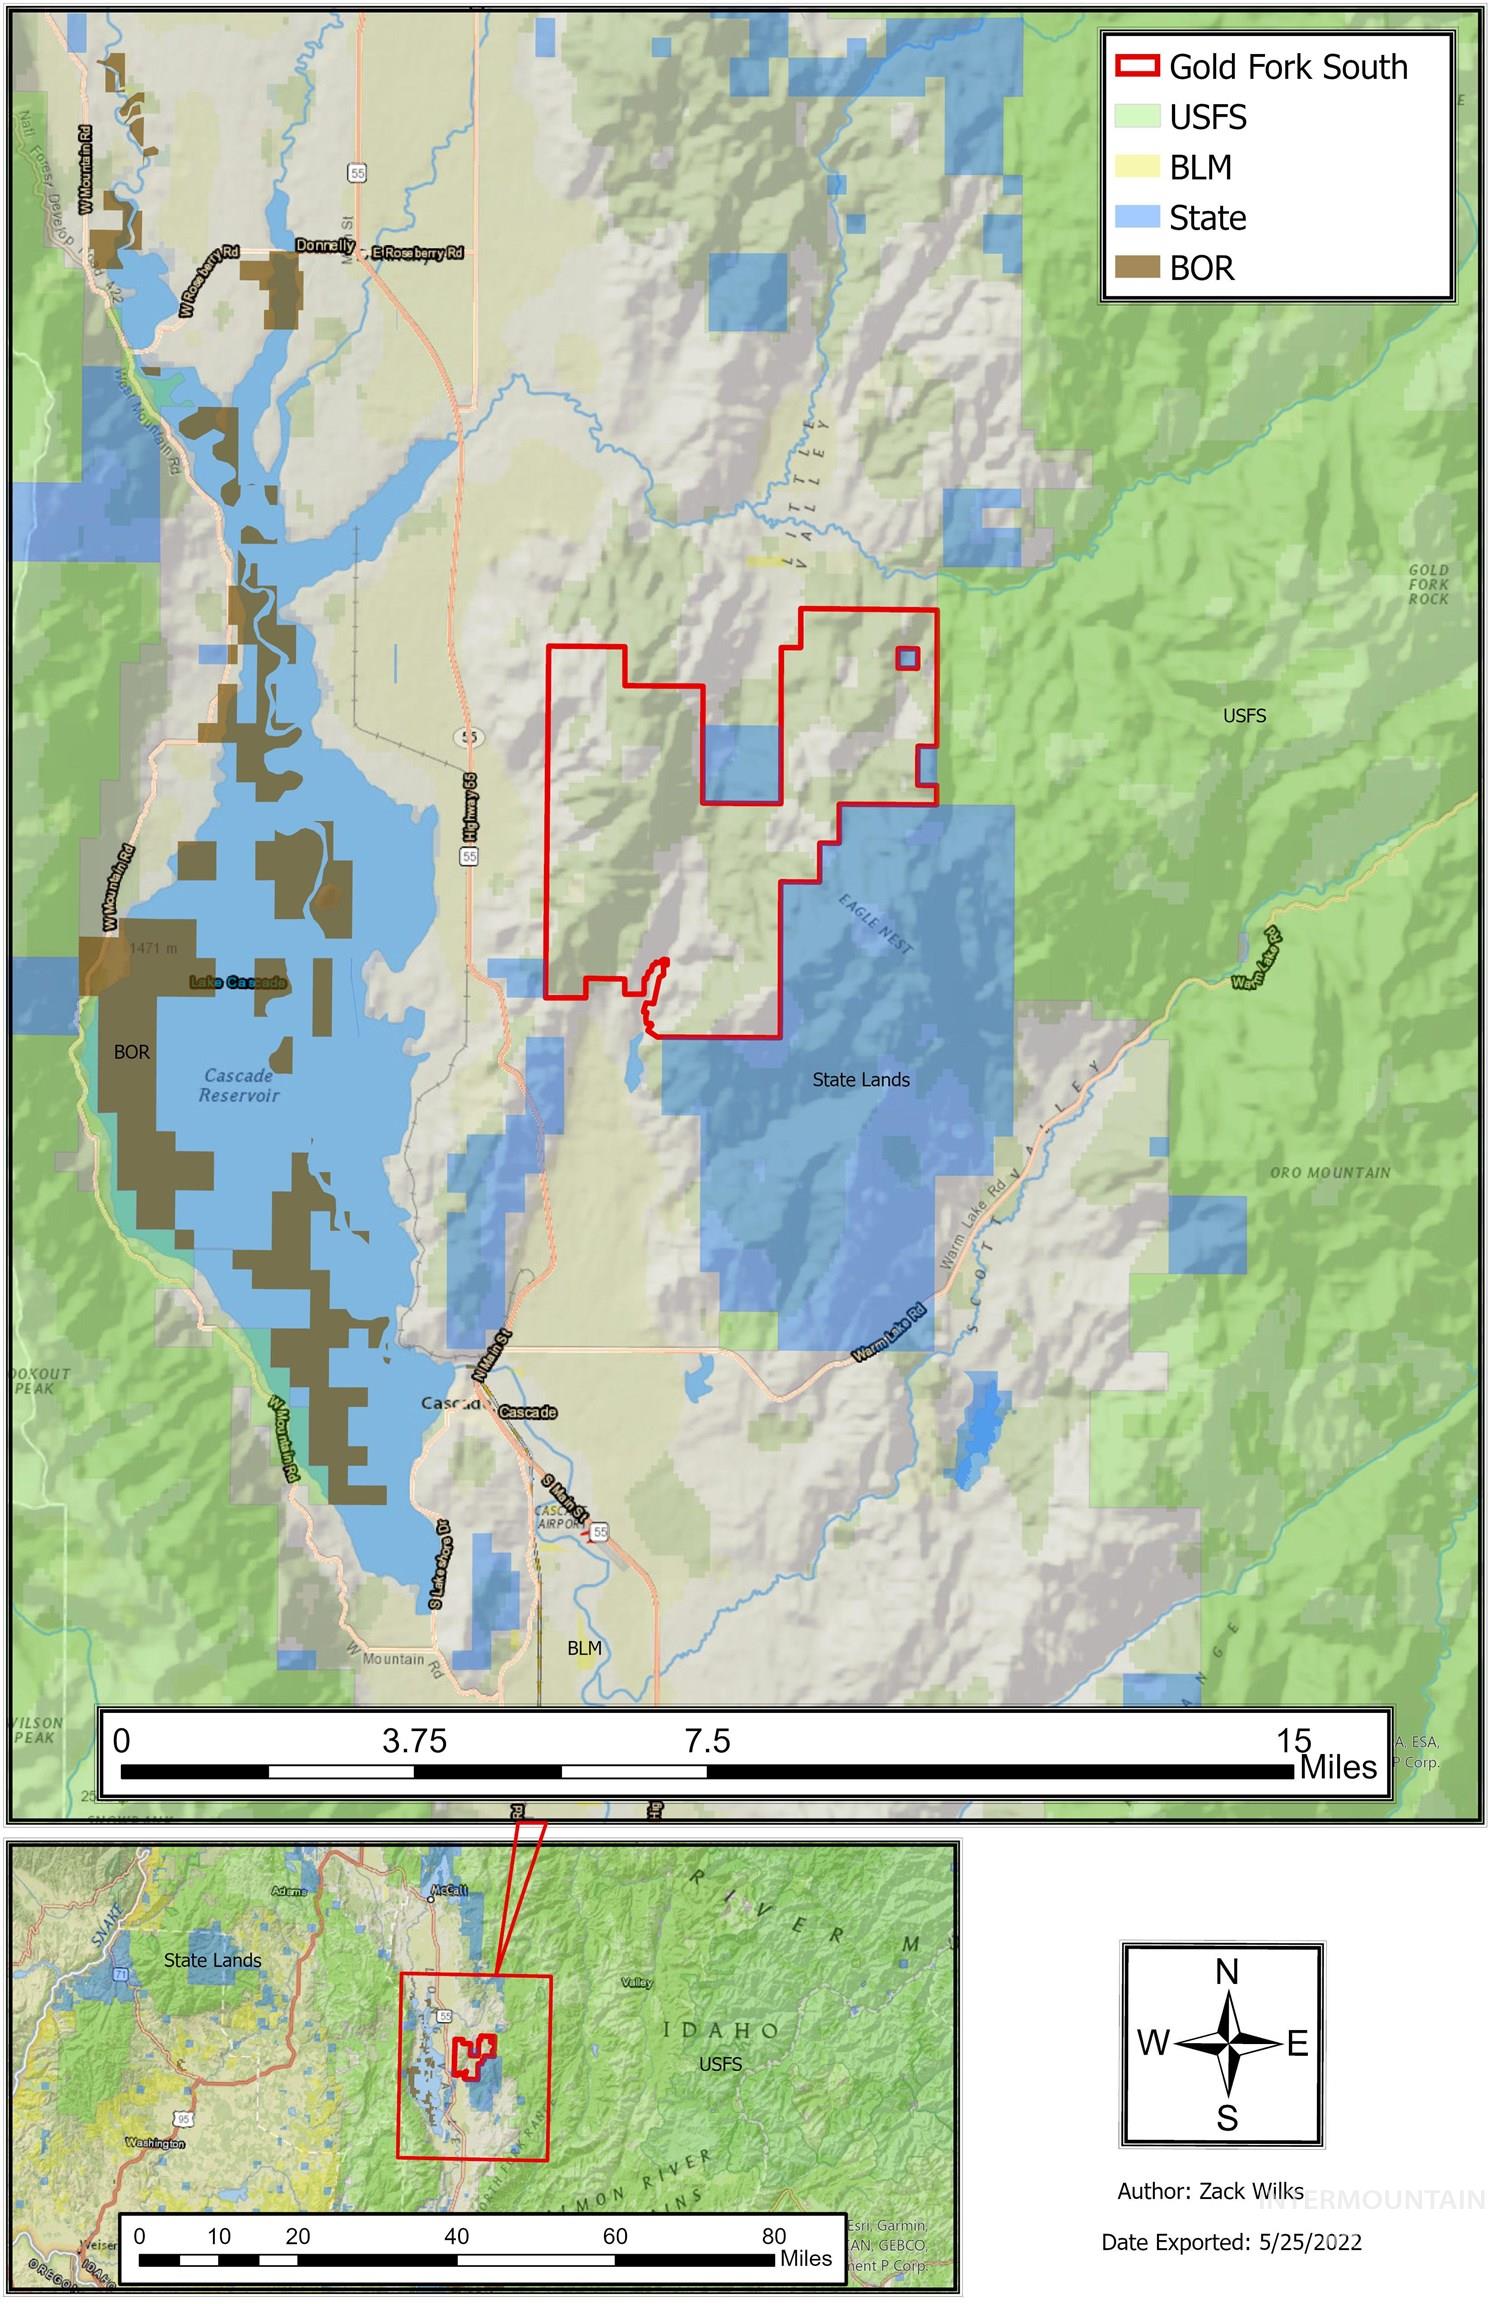 TBD Smalley Rd, Cascade, Idaho 83611, Land For Sale, Price $31,985,000,MLS 98846092